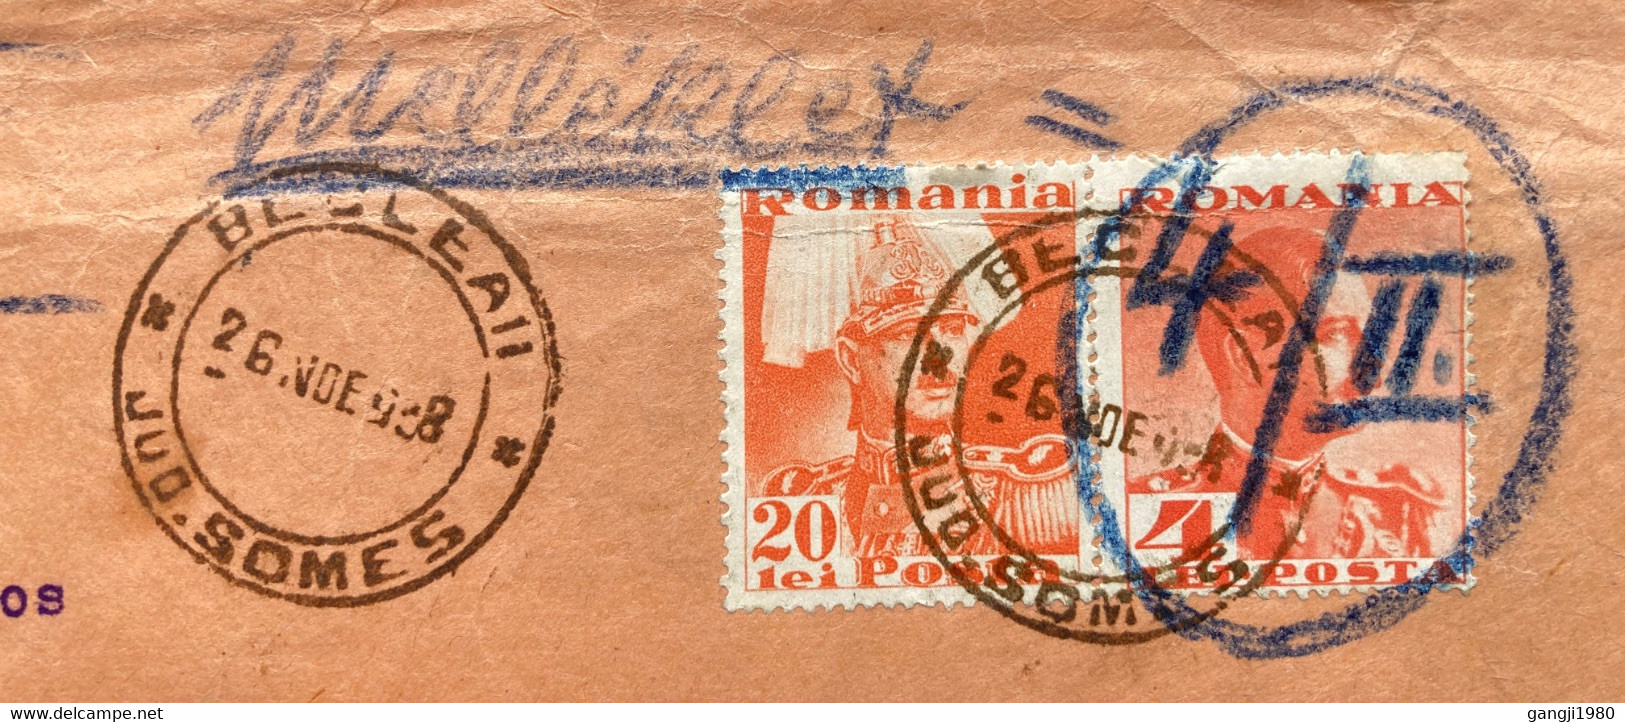 ROMANIA 1948, KING MICHAEL WITH CROWN 2 STAMPS,BECLEAN CITY TO BUDAPEST CITY HUNGARY REGISTERED COVER - Covers & Documents